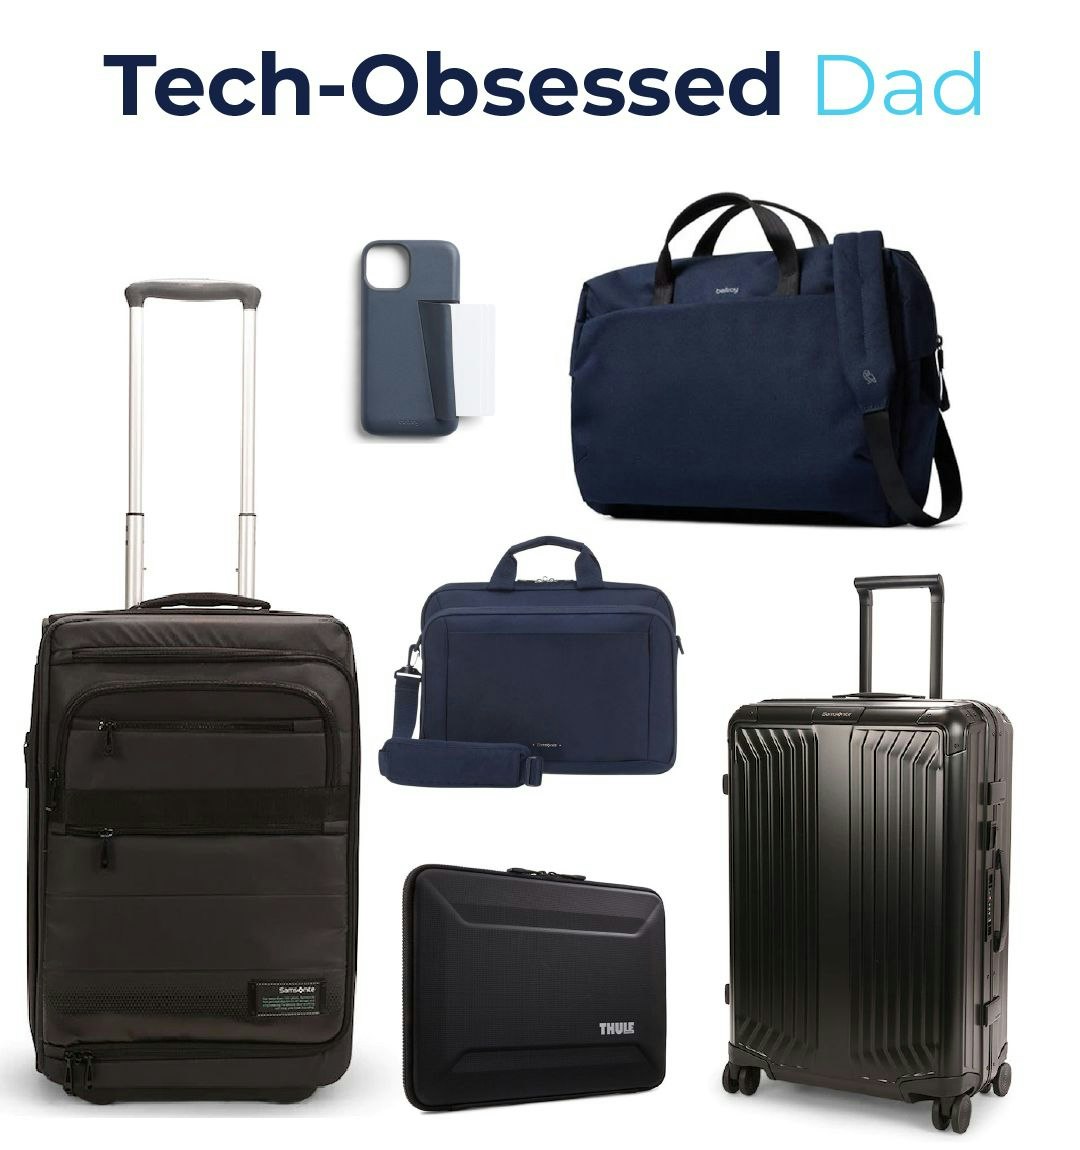 Products of gift ideas for the Tech-Obsessed Dad